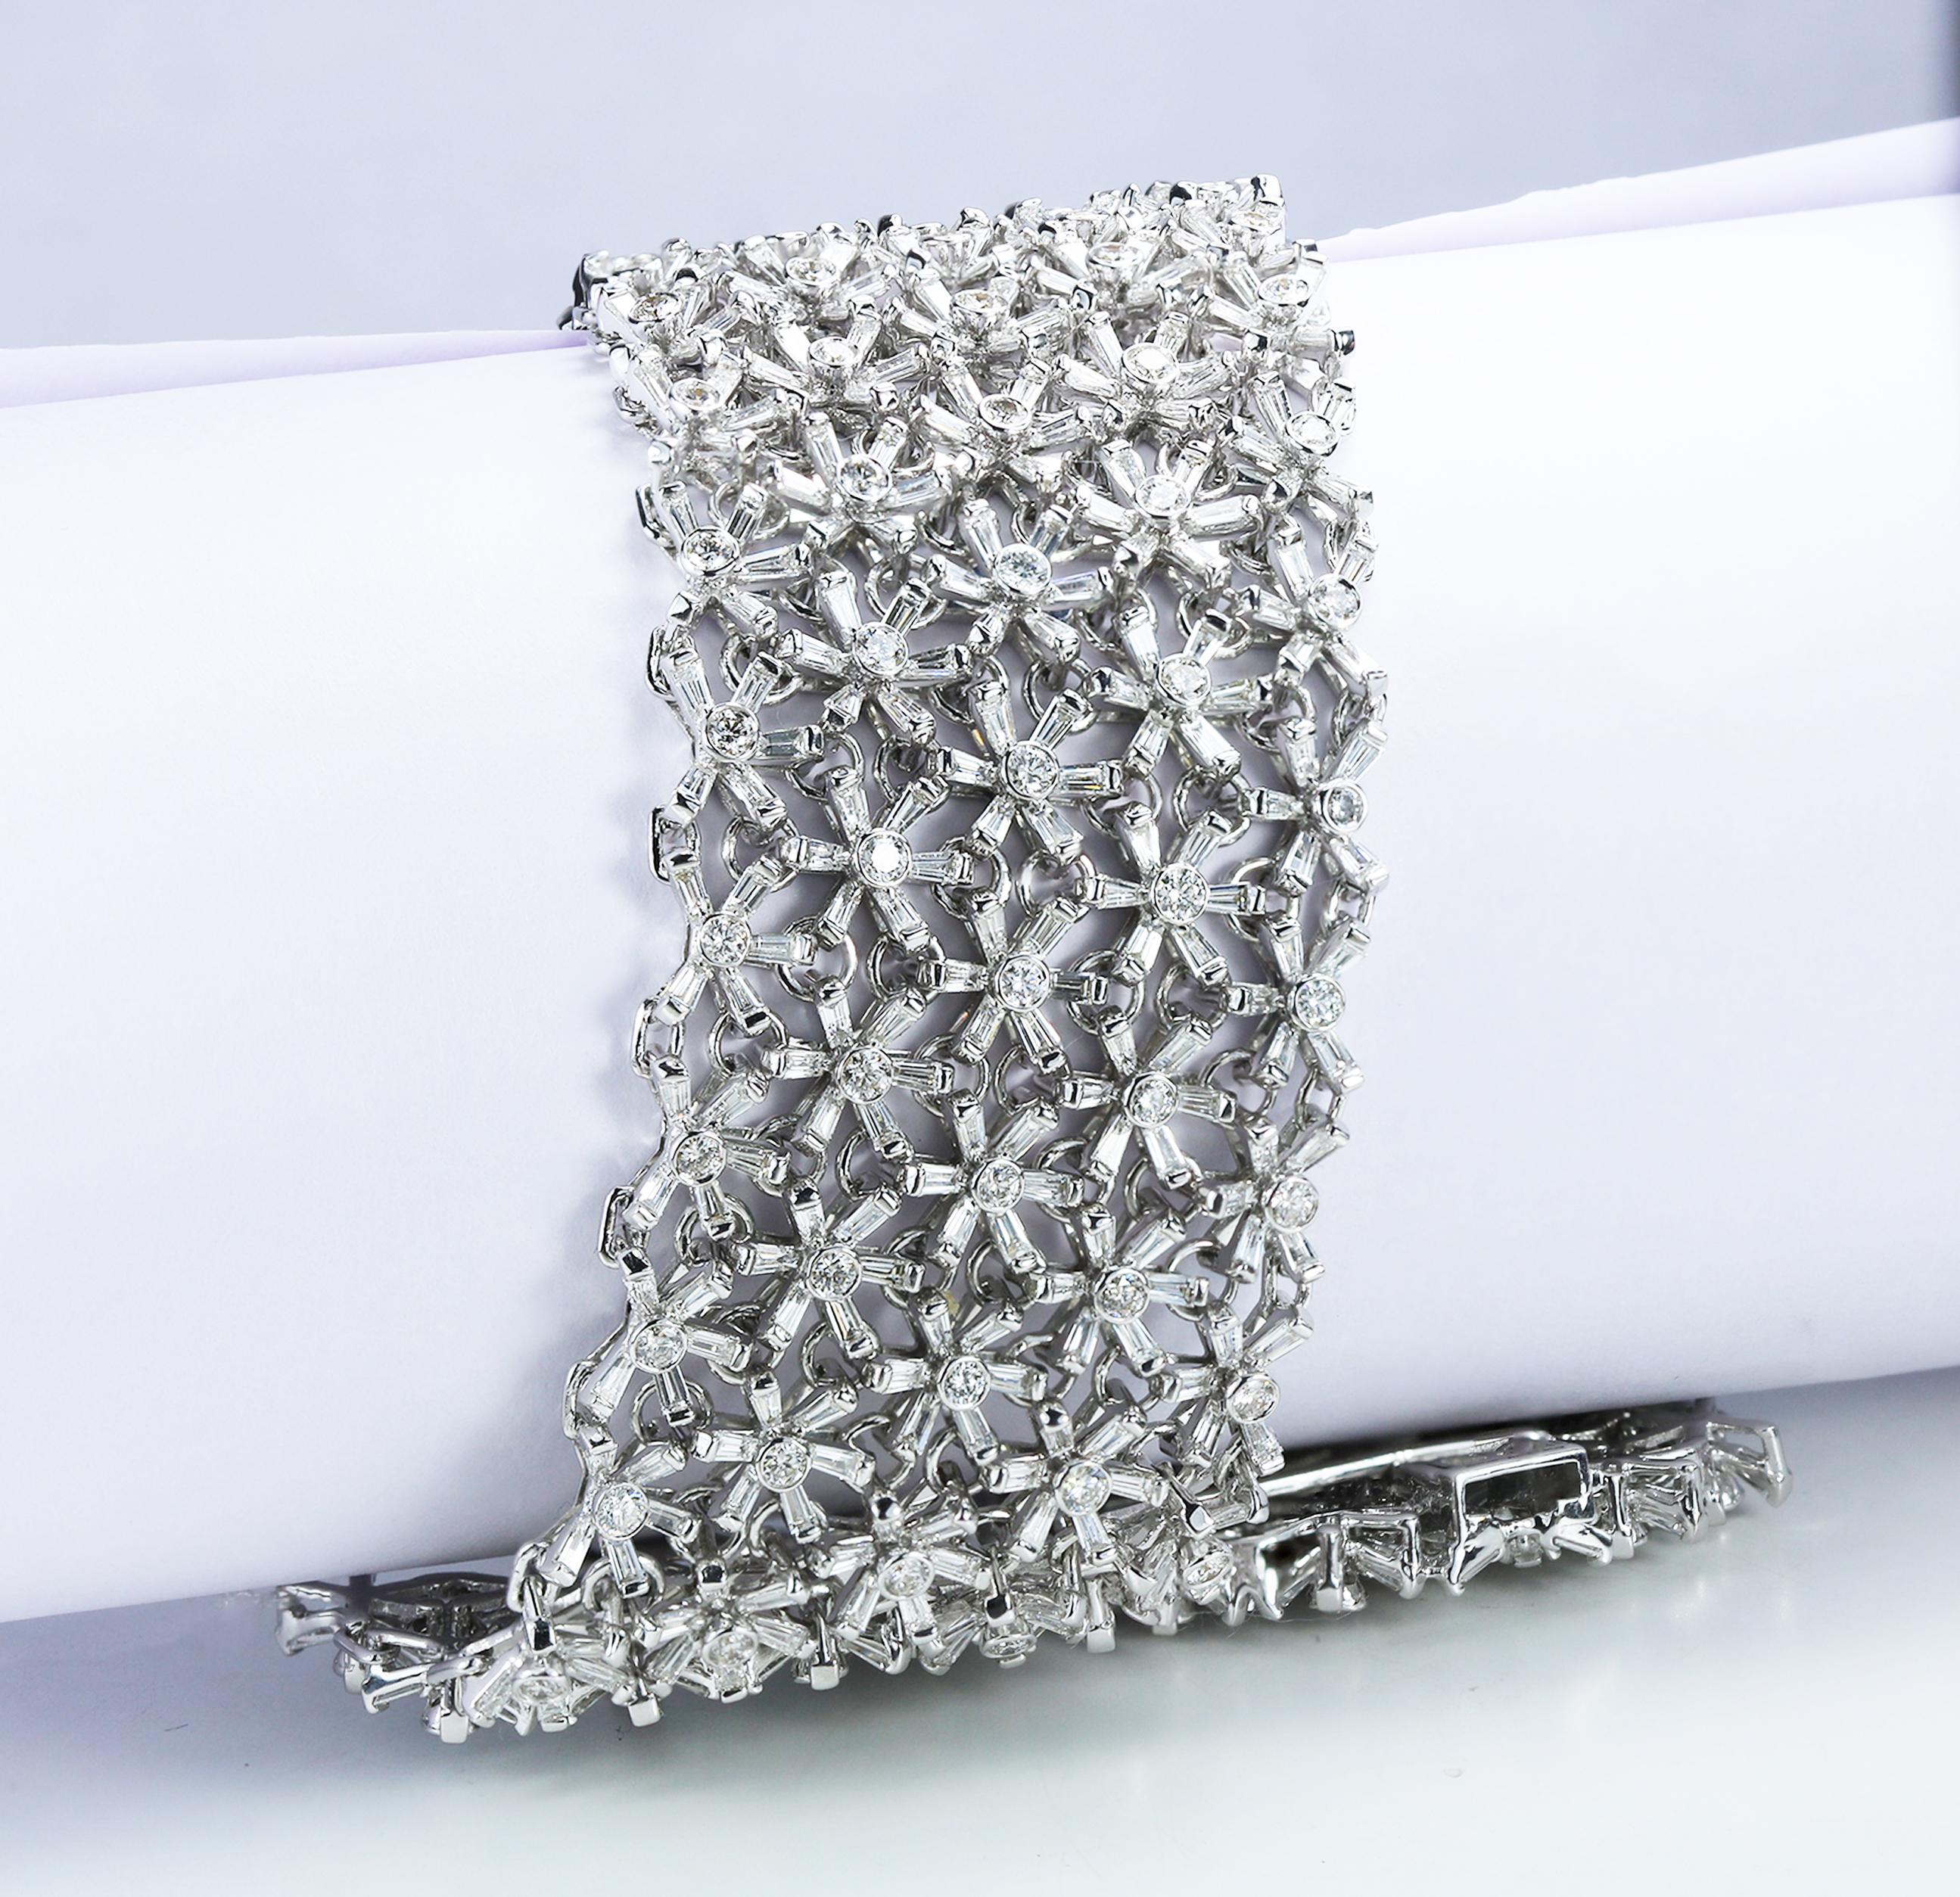 F-G/ VS-SI brilliant cut diamonds tennis bracelet

Exemplifying the timeless allure of the tennis bracelet is this 18K white gold rendition featuring F-G color, VS-SI handpicked brilliant cut diamonds in a prong setting. The multi-lined bracelet is